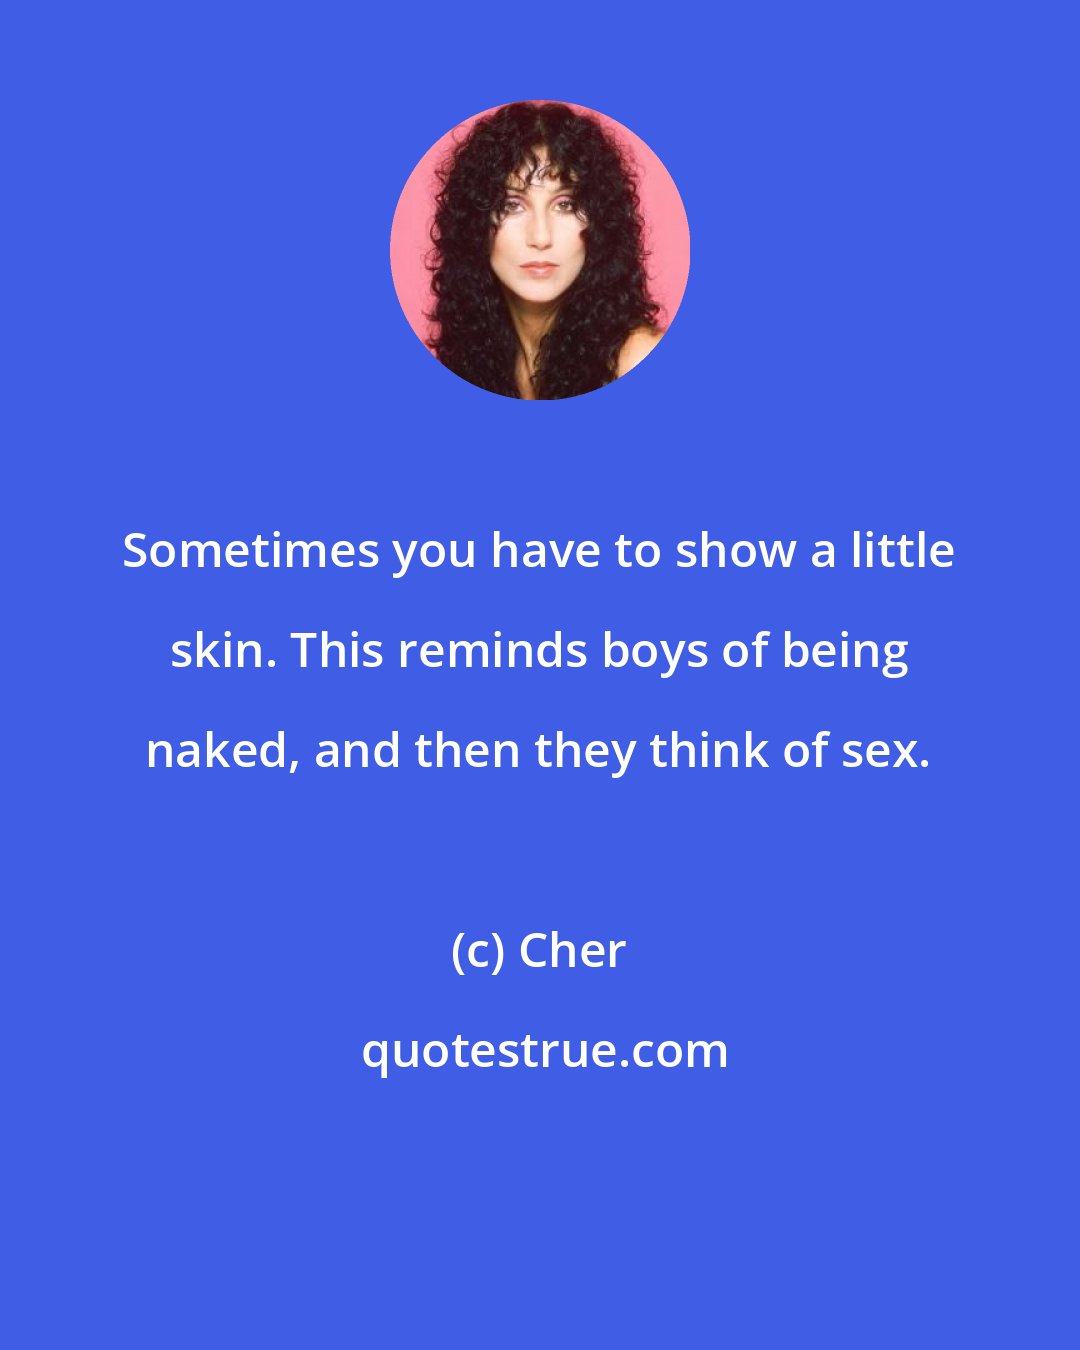 Cher: Sometimes you have to show a little skin. This reminds boys of being naked, and then they think of sex.